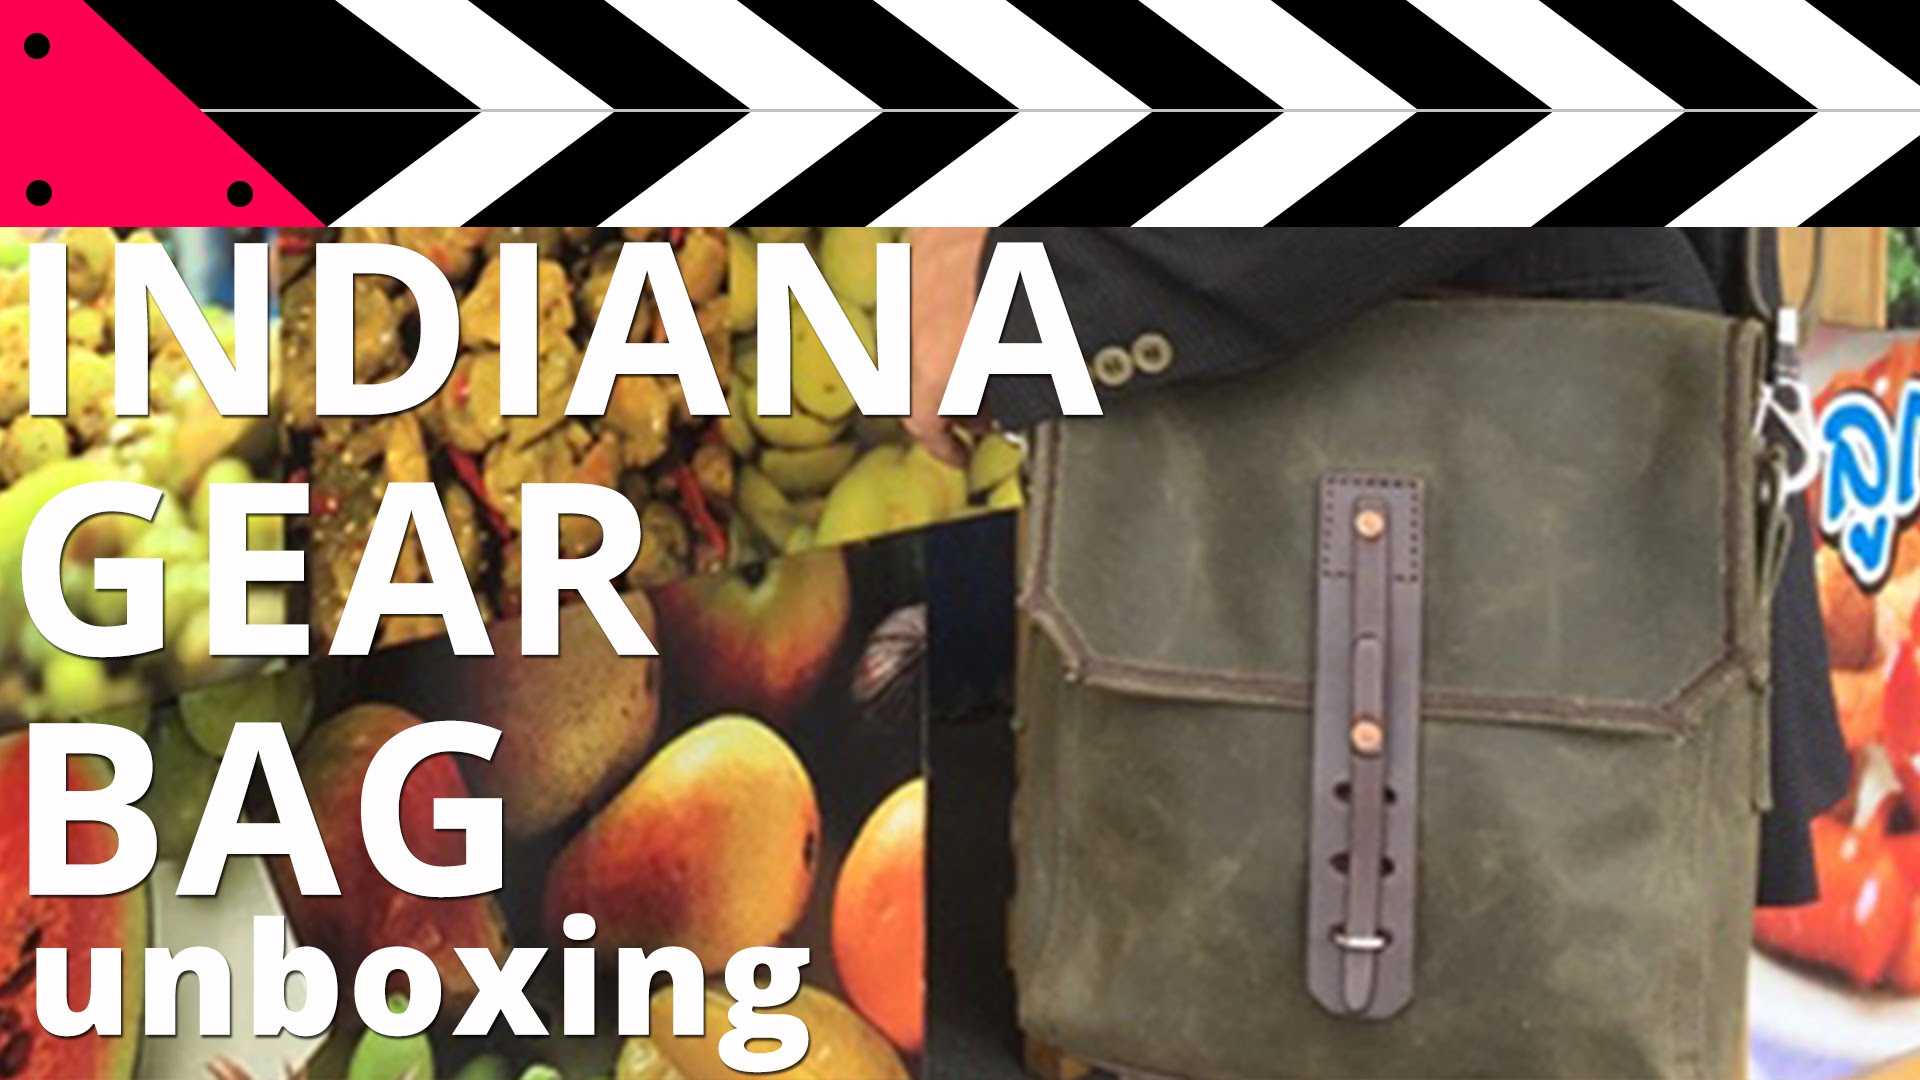 Indiana Gear Bag by Saddleback Leather - Review